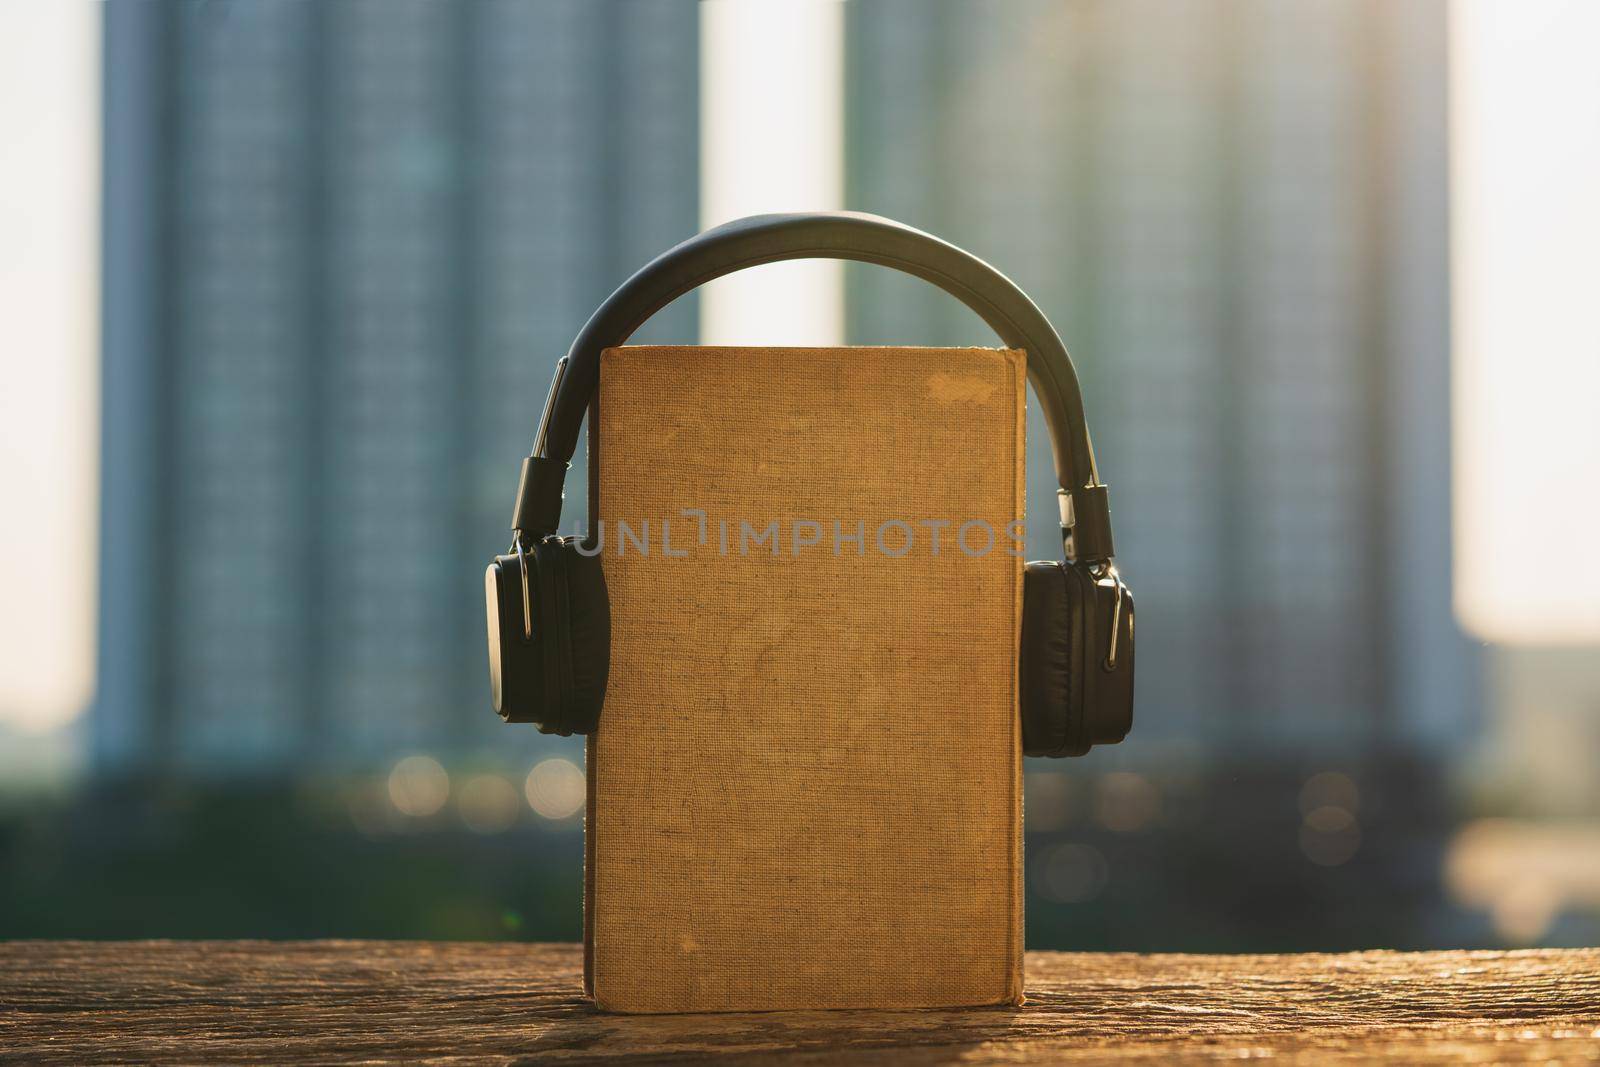 Audio book concept by Wasant